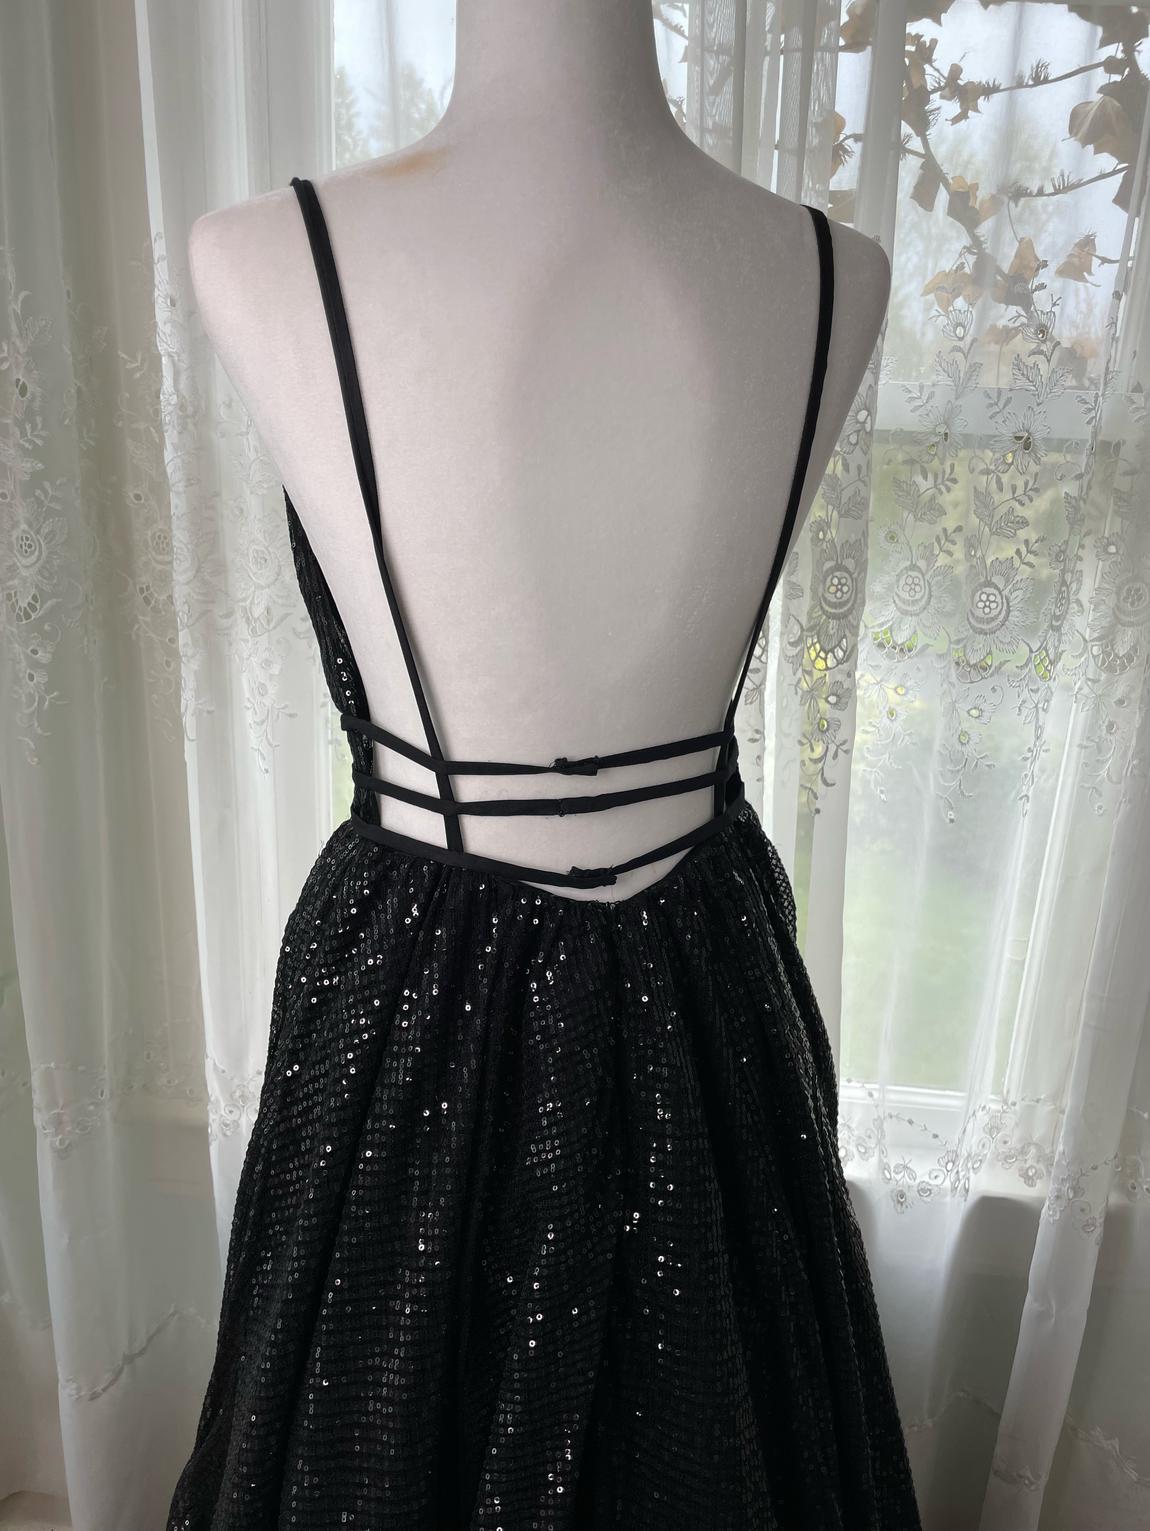 Jovani Size 6 Sequined Black Ball Gown on Queenly